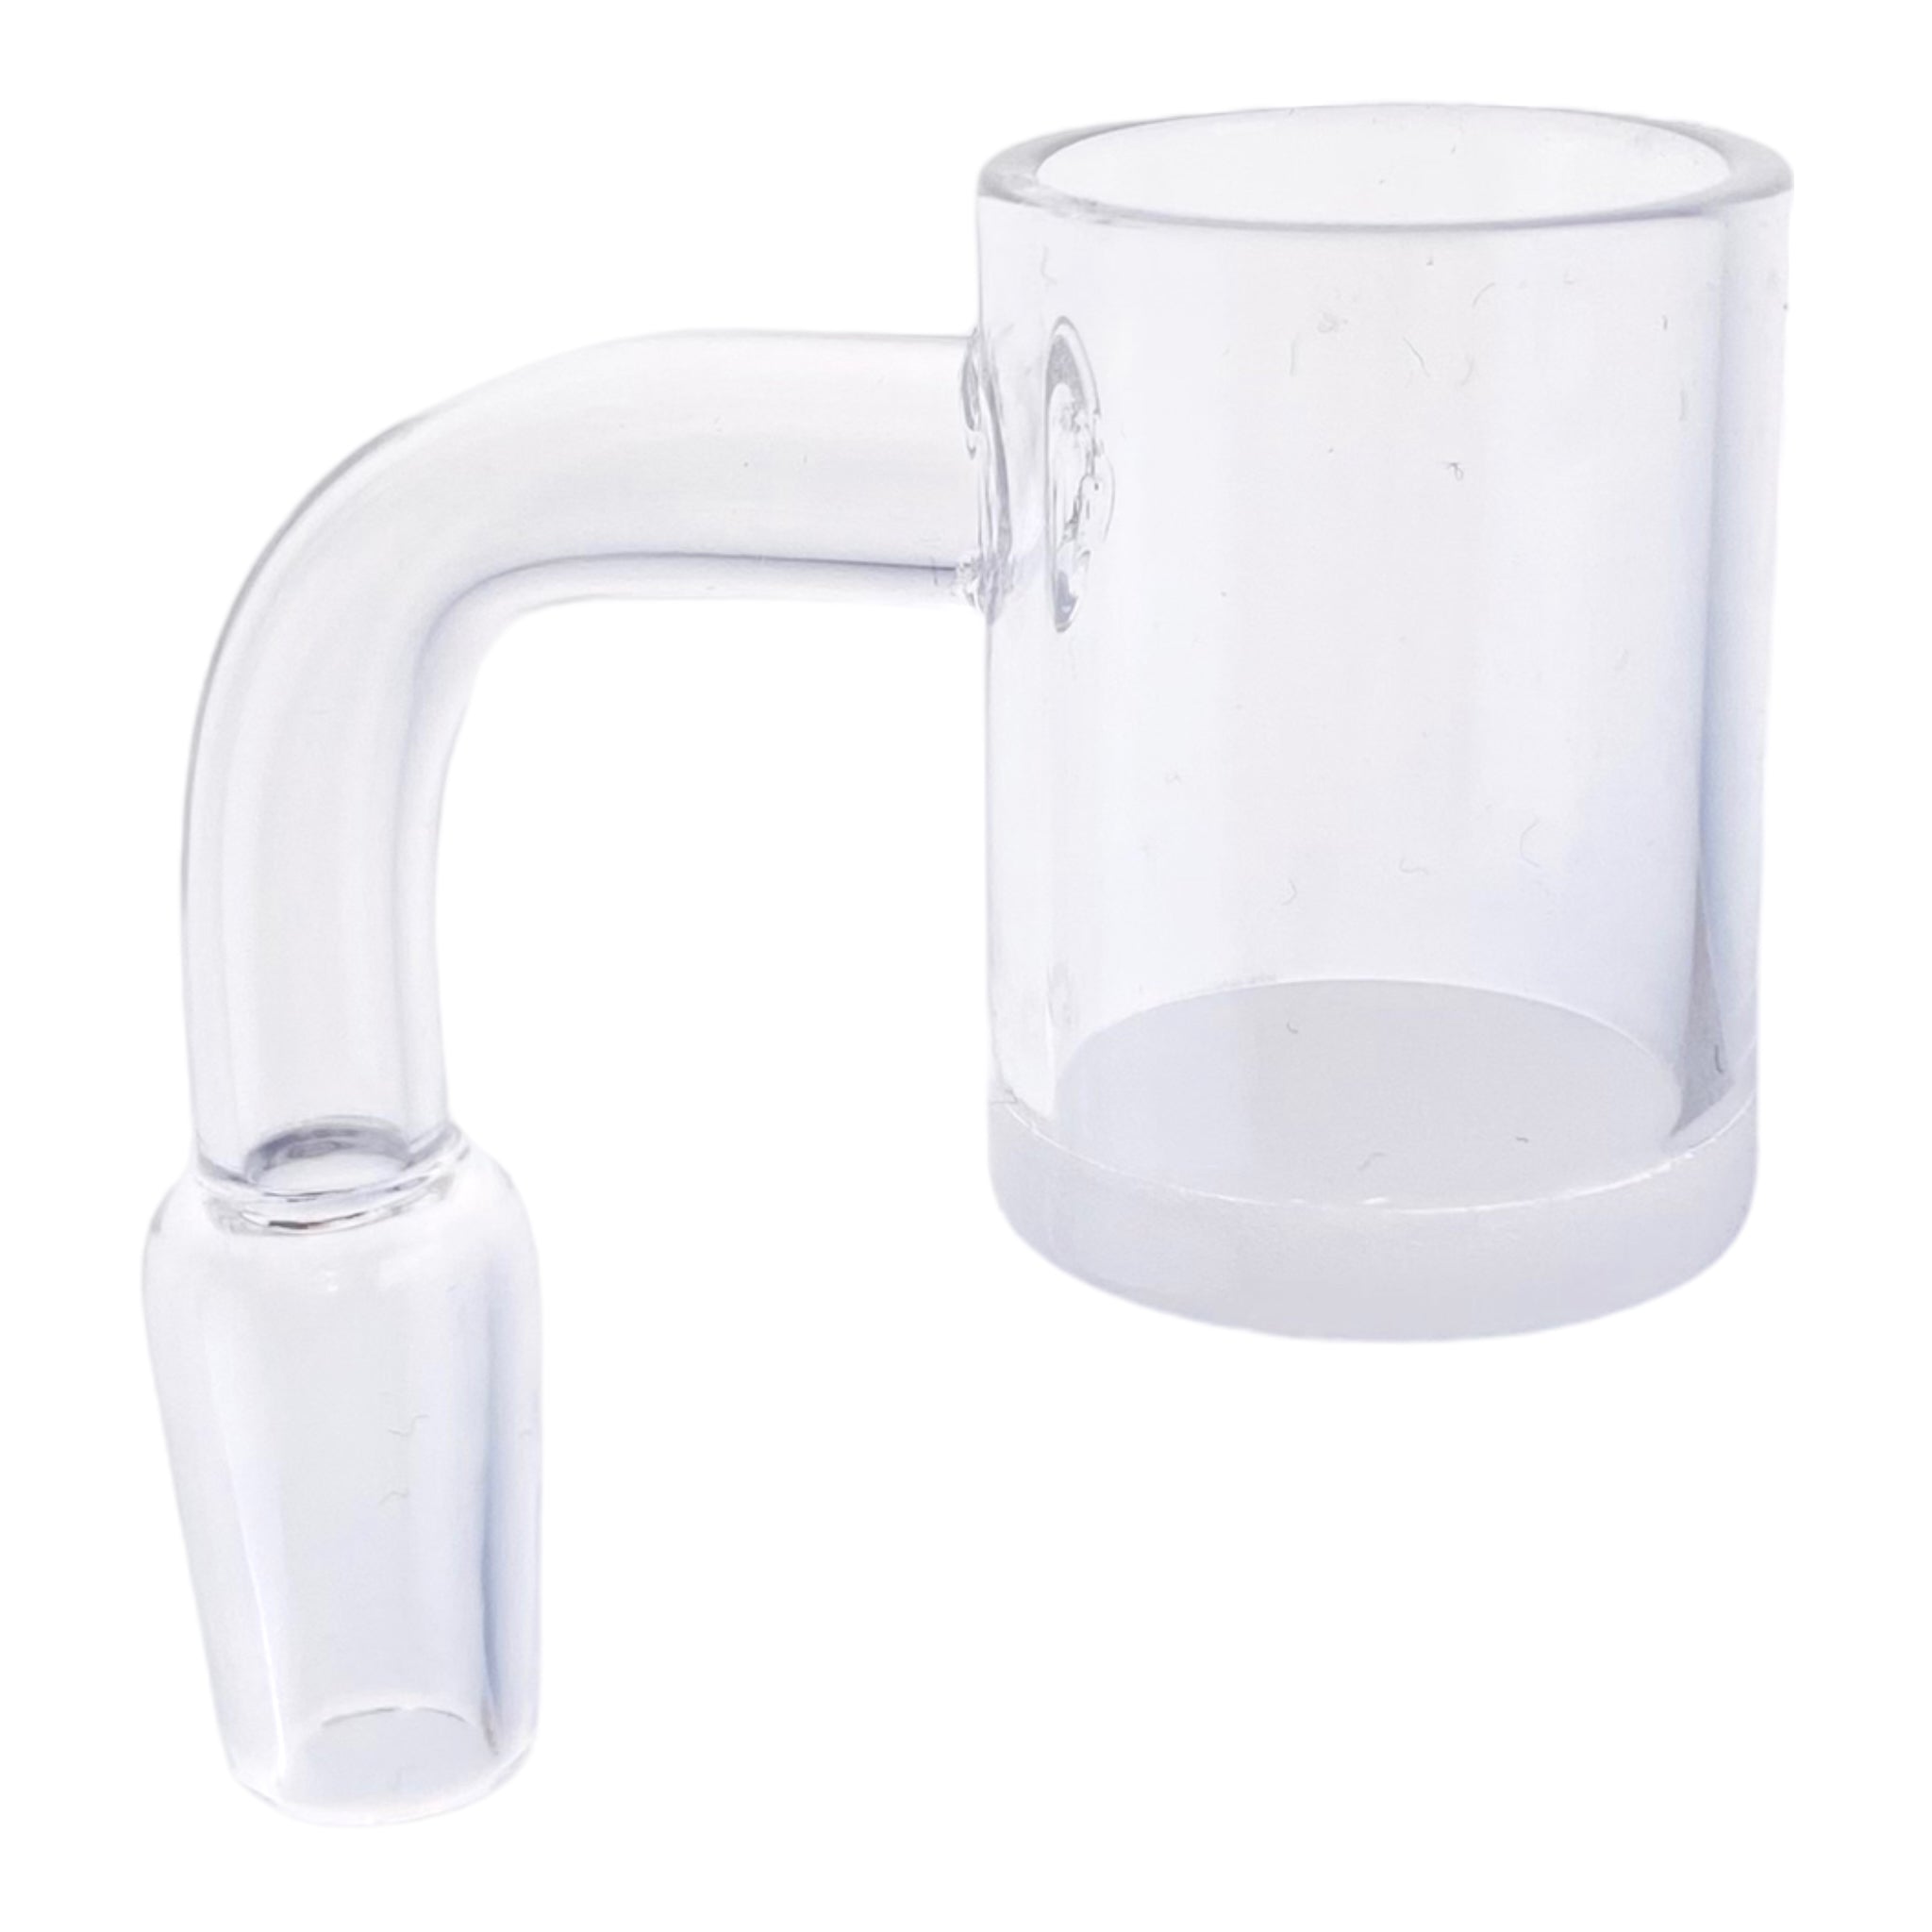 14mm Quartz Banger With 90 Degree Male Fitting And 25mm Wide Opaqued Quartz Bucket With Extra Thick Base